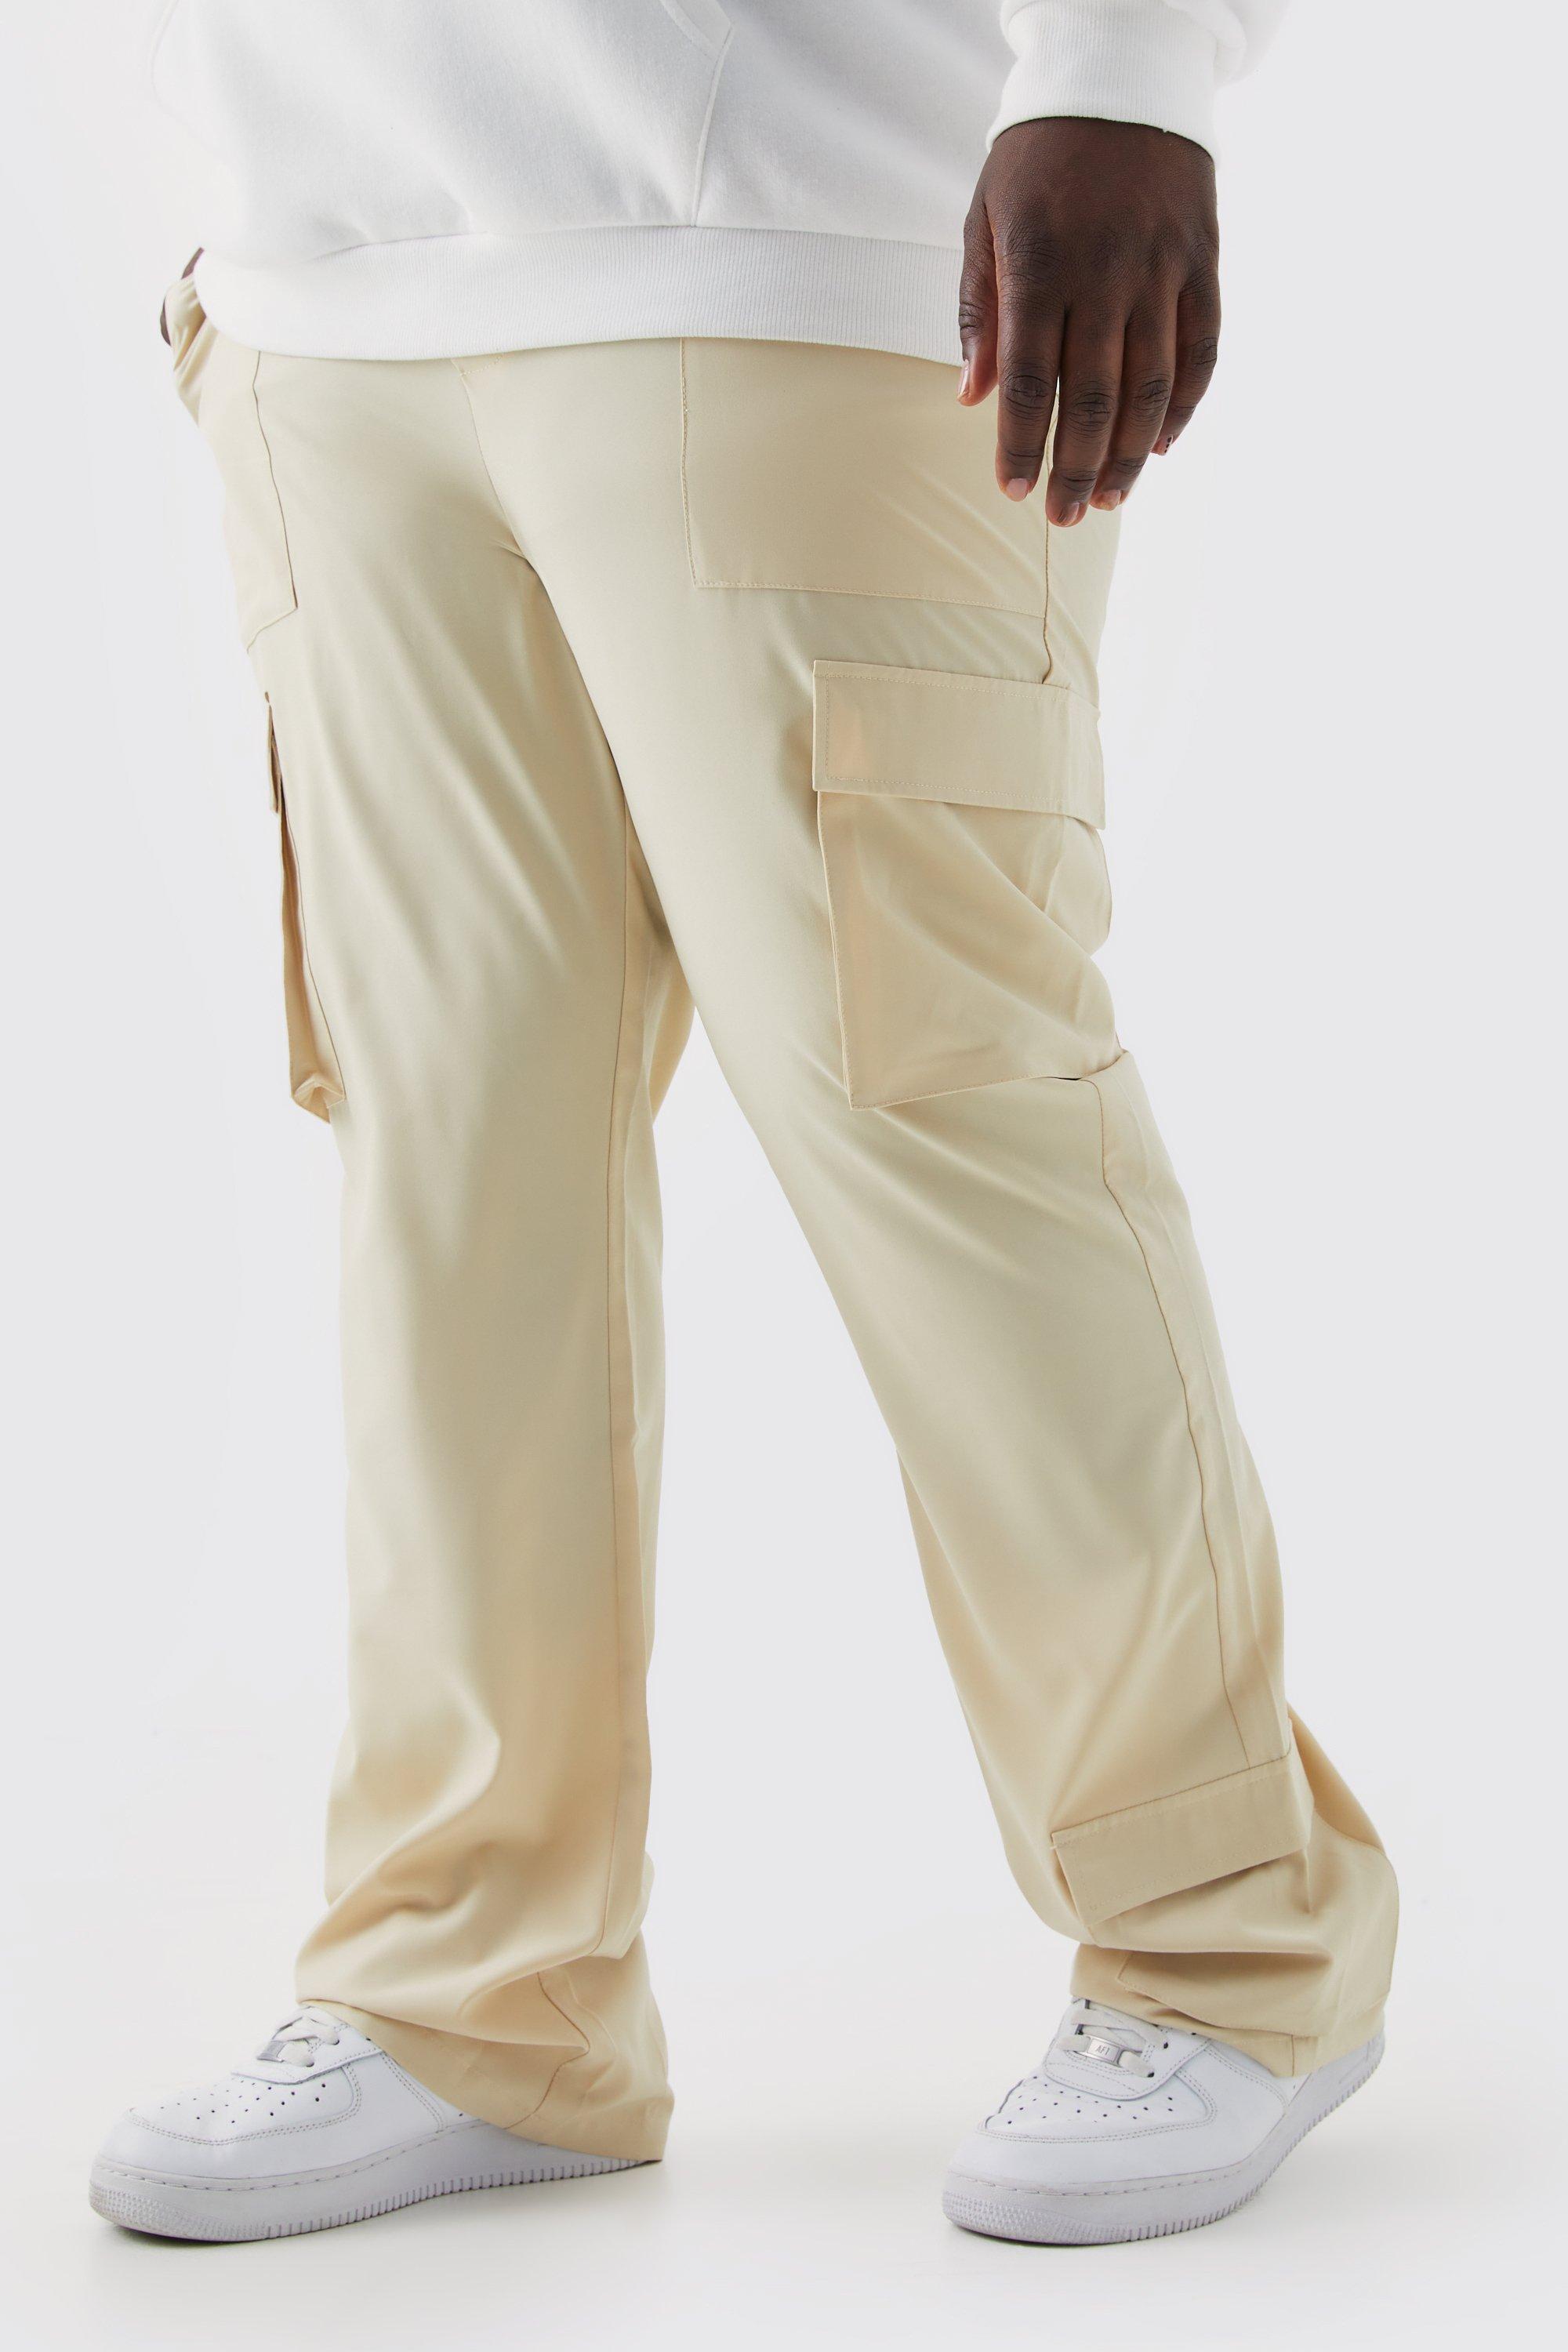 Image of Pantaloni Cargo Plus Size Slim Fit in Stretch con cuciture a contrasto, Beige